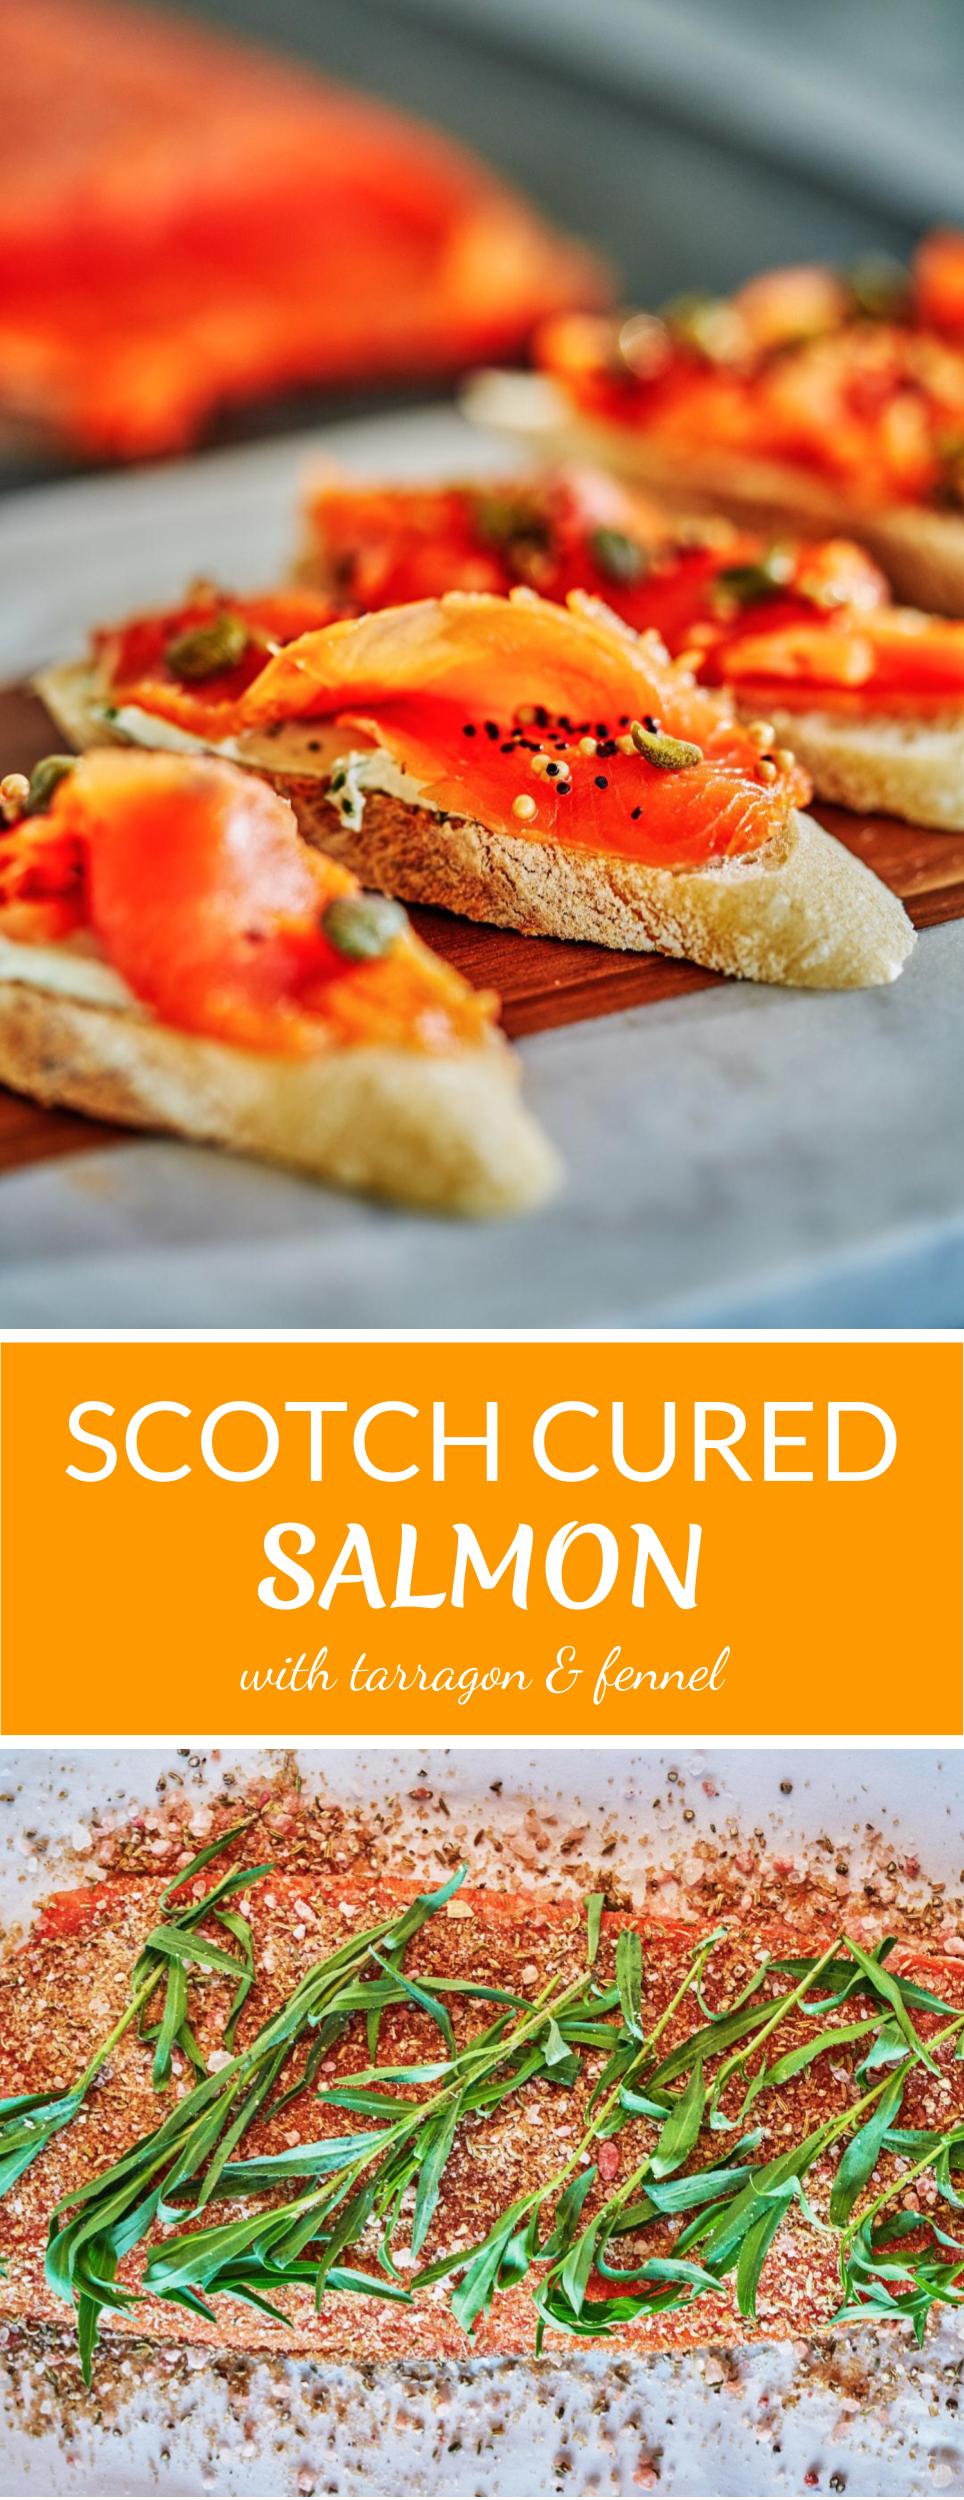 Tarragon & Fennel Scotch Cured Salmon - How to Cure Salmon | Proportional Plate